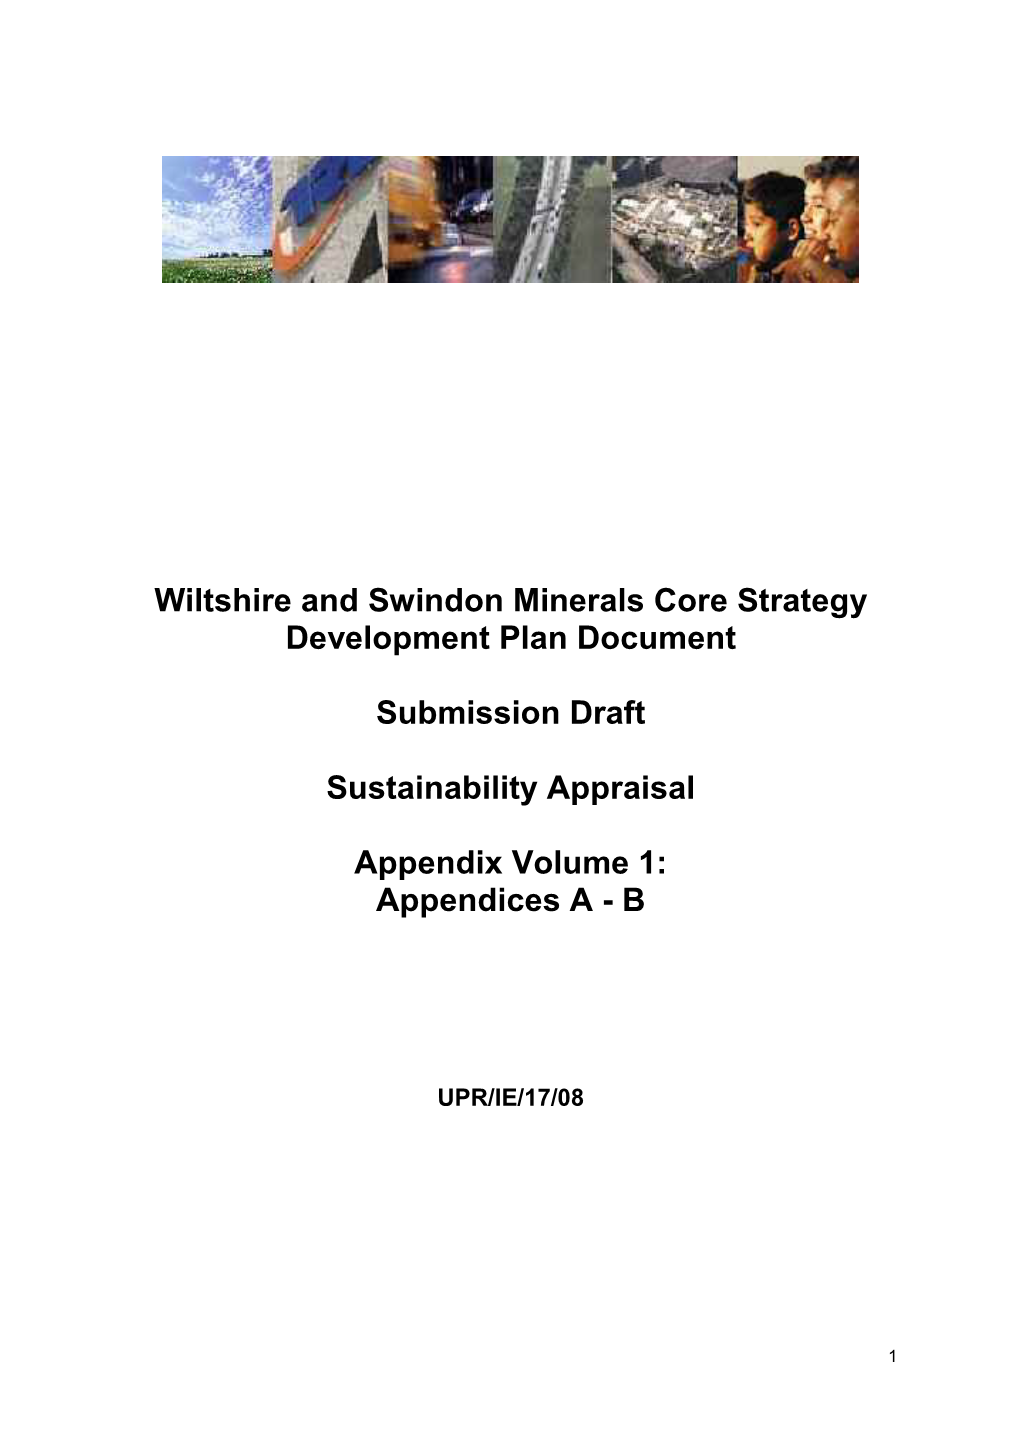 Minerals Core Strategy Final Sustainability